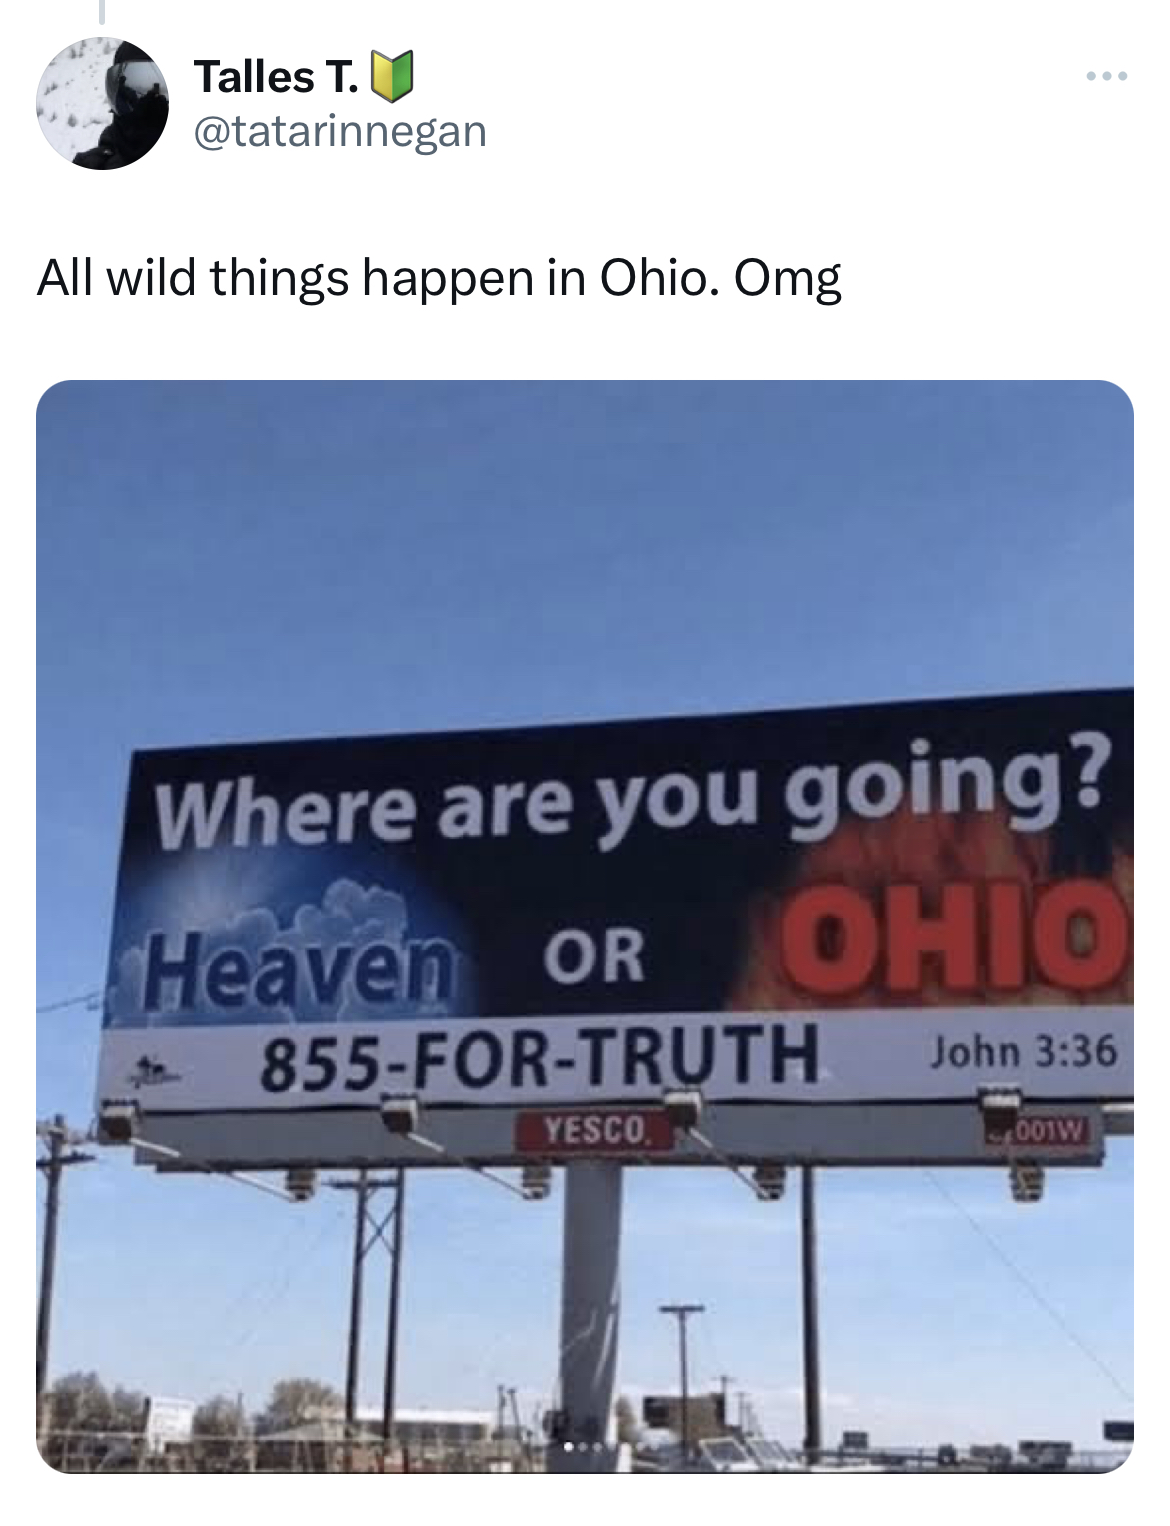 savage and funny tweets -wamu - Talles T. All wild things happen in Ohio. Omg Where are you going? Ohio John Heaven Or 855ForTruth Yesco 001W